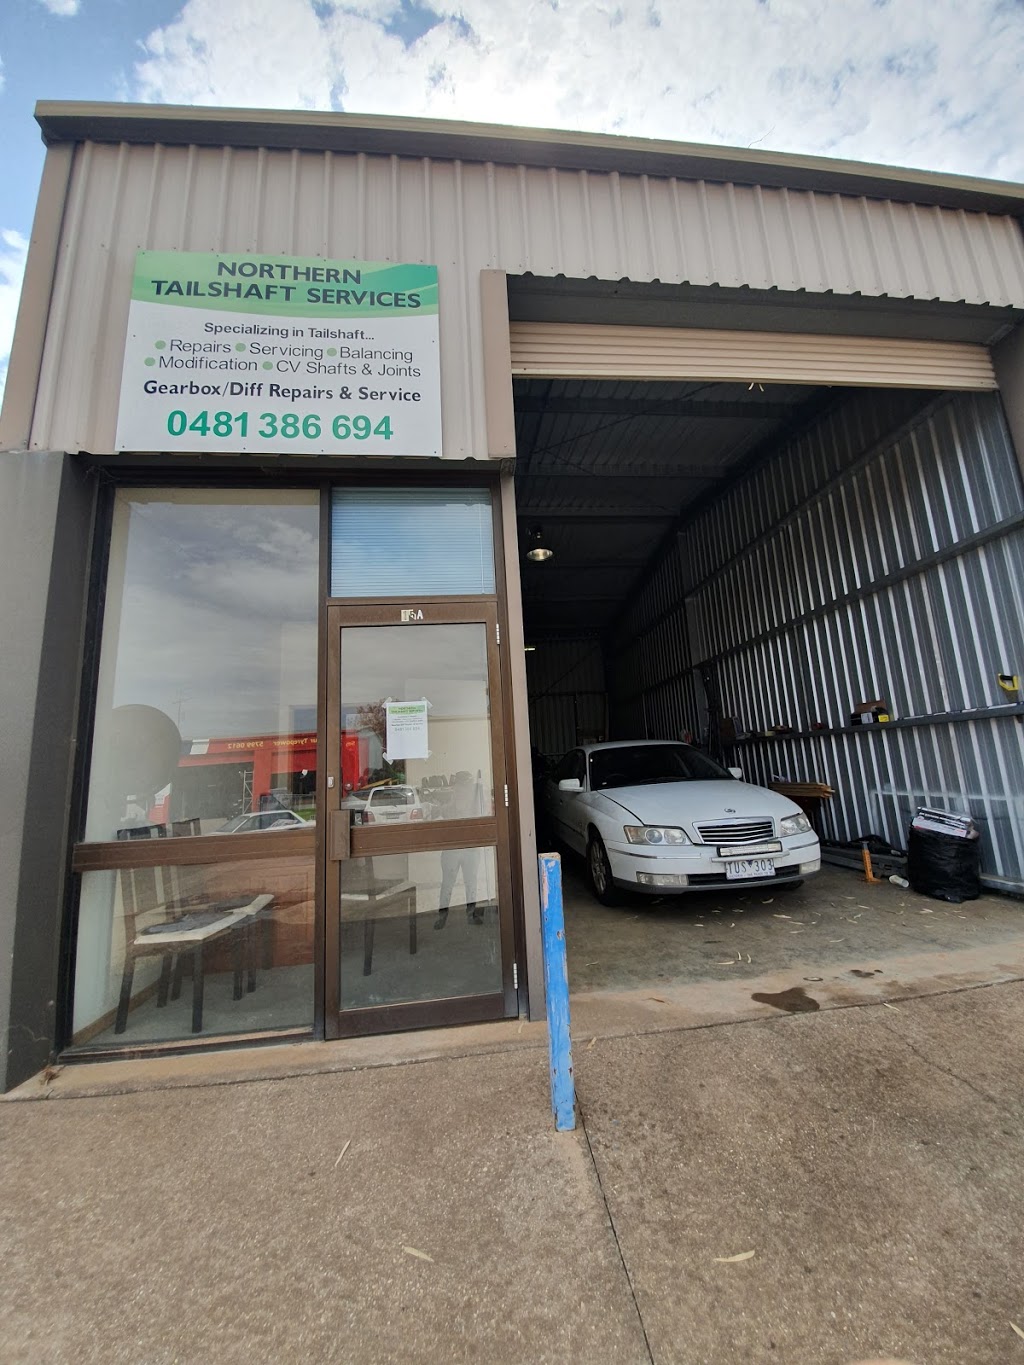 Northern Tailshaft Services | car repair | 15a/57 Emily St, Seymour VIC 3660, Australia | 0481386694 OR +61 481 386 694